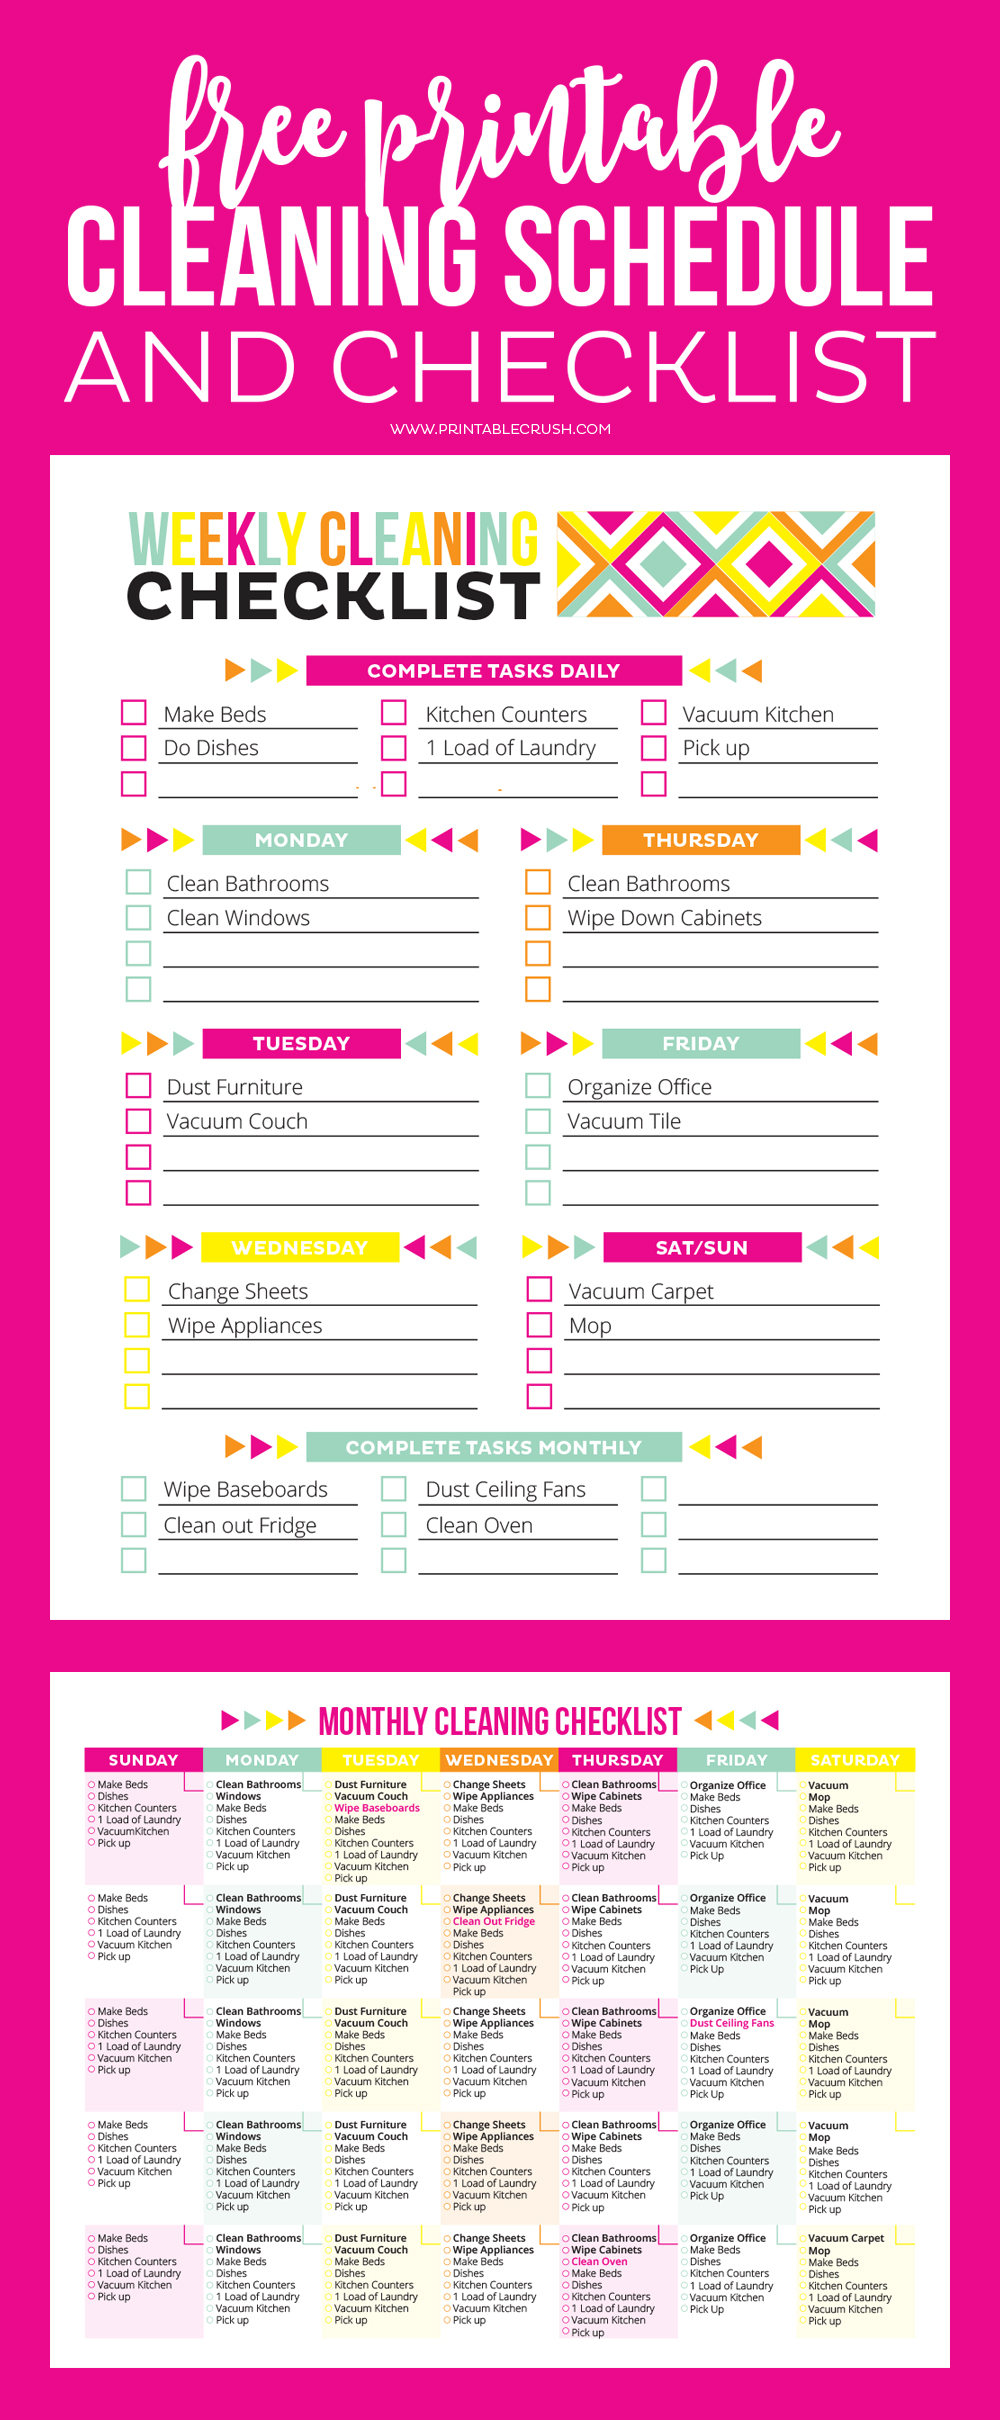 free-printable-cleaning-schedule-and-checklist-printable-crush